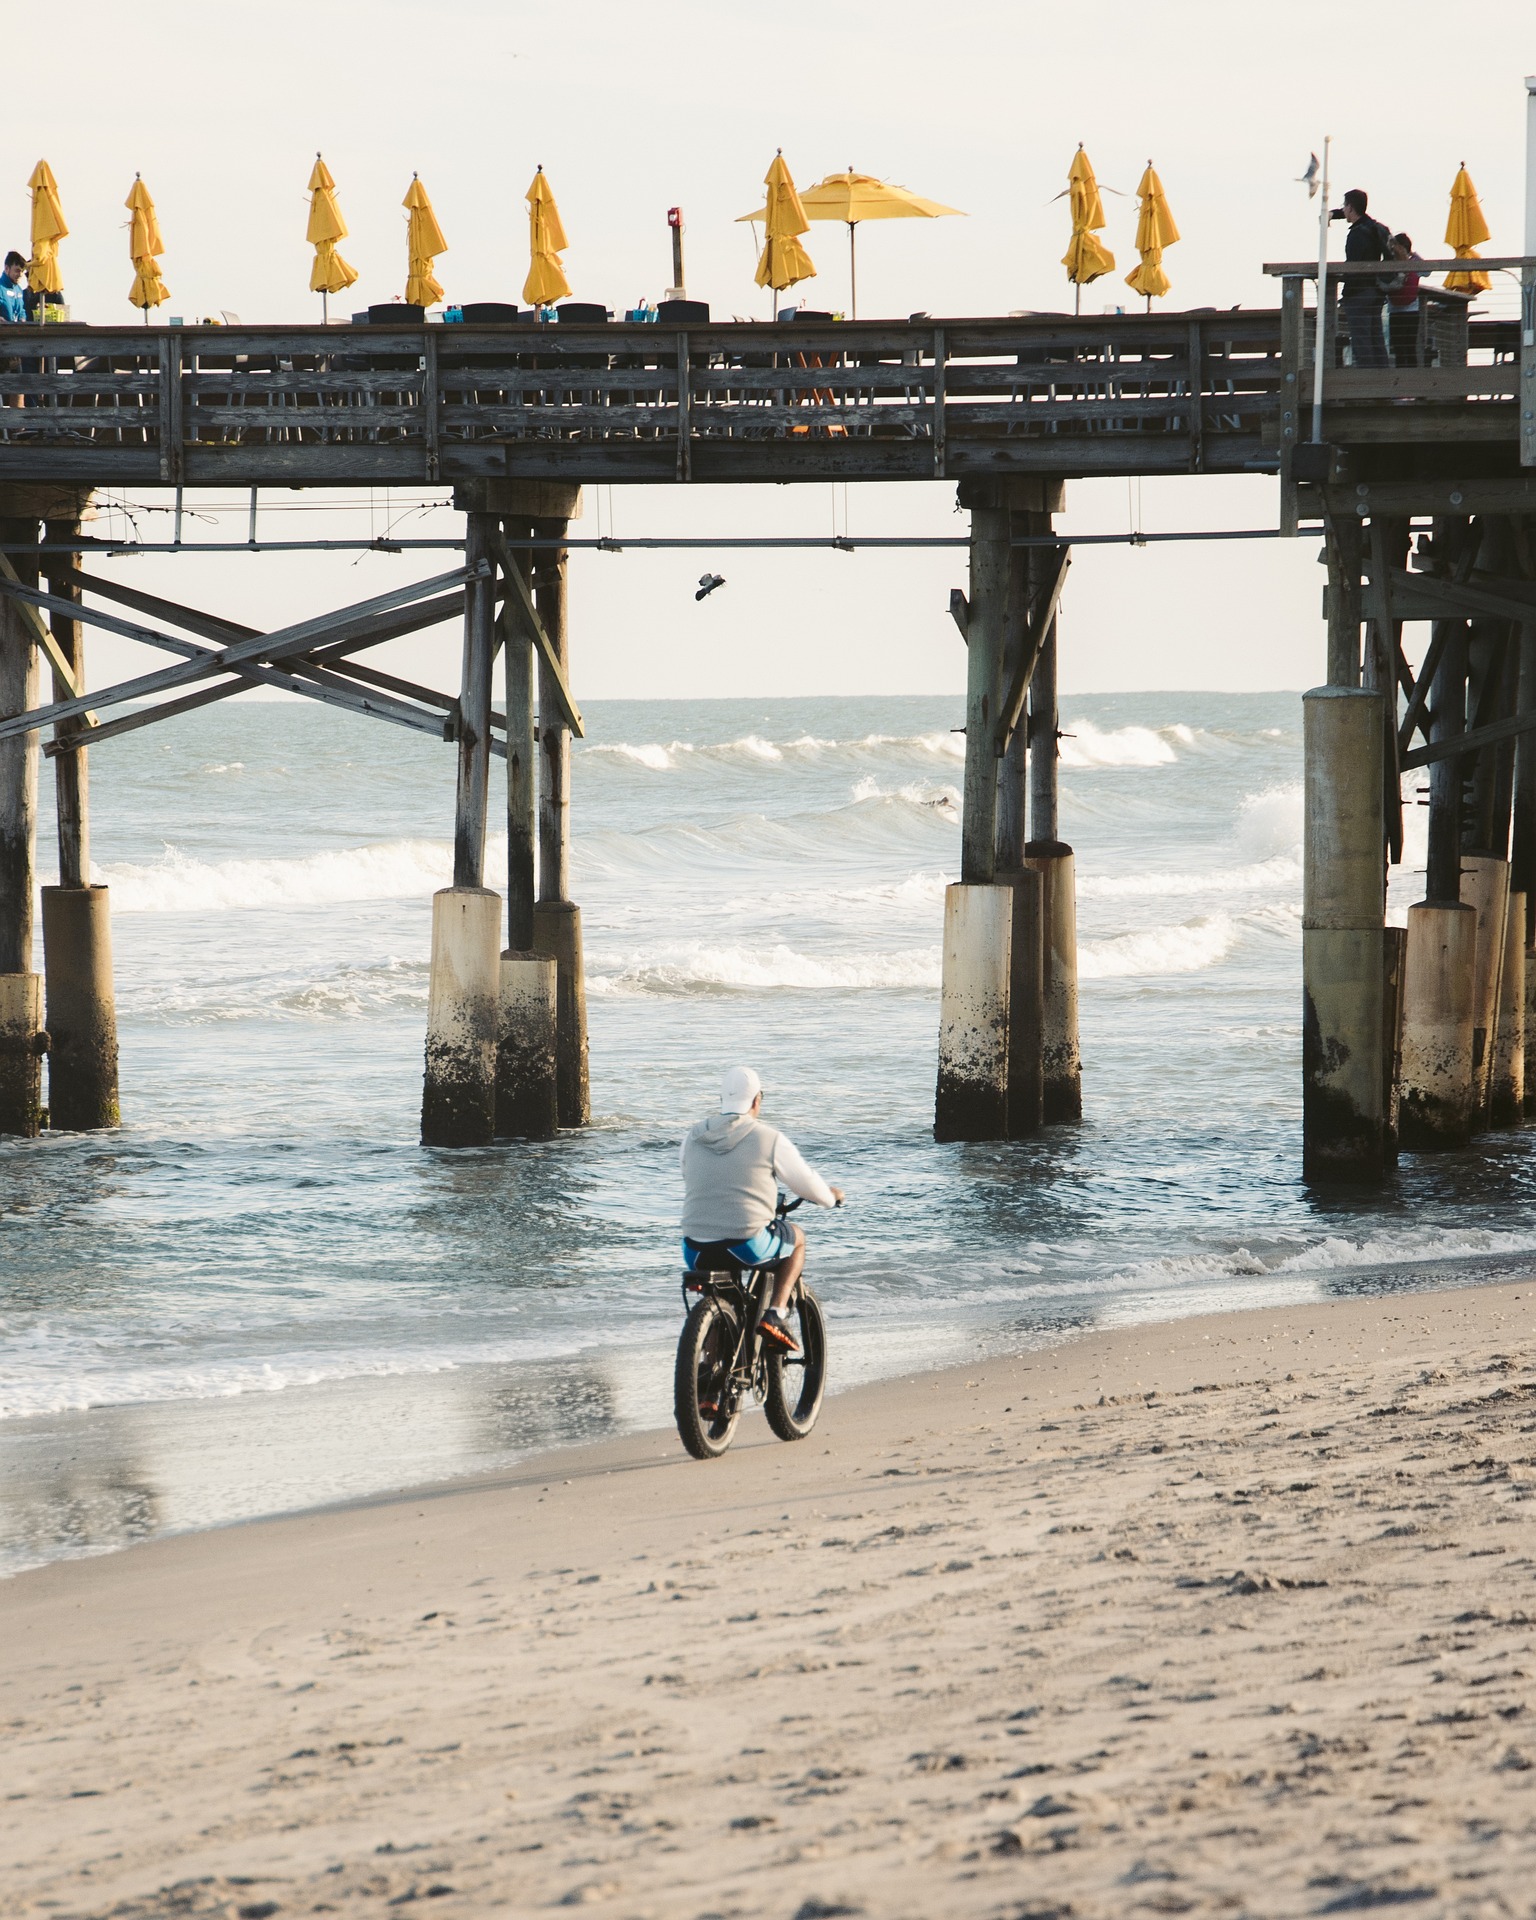 ebike laws florda: Can you cycle on a beach